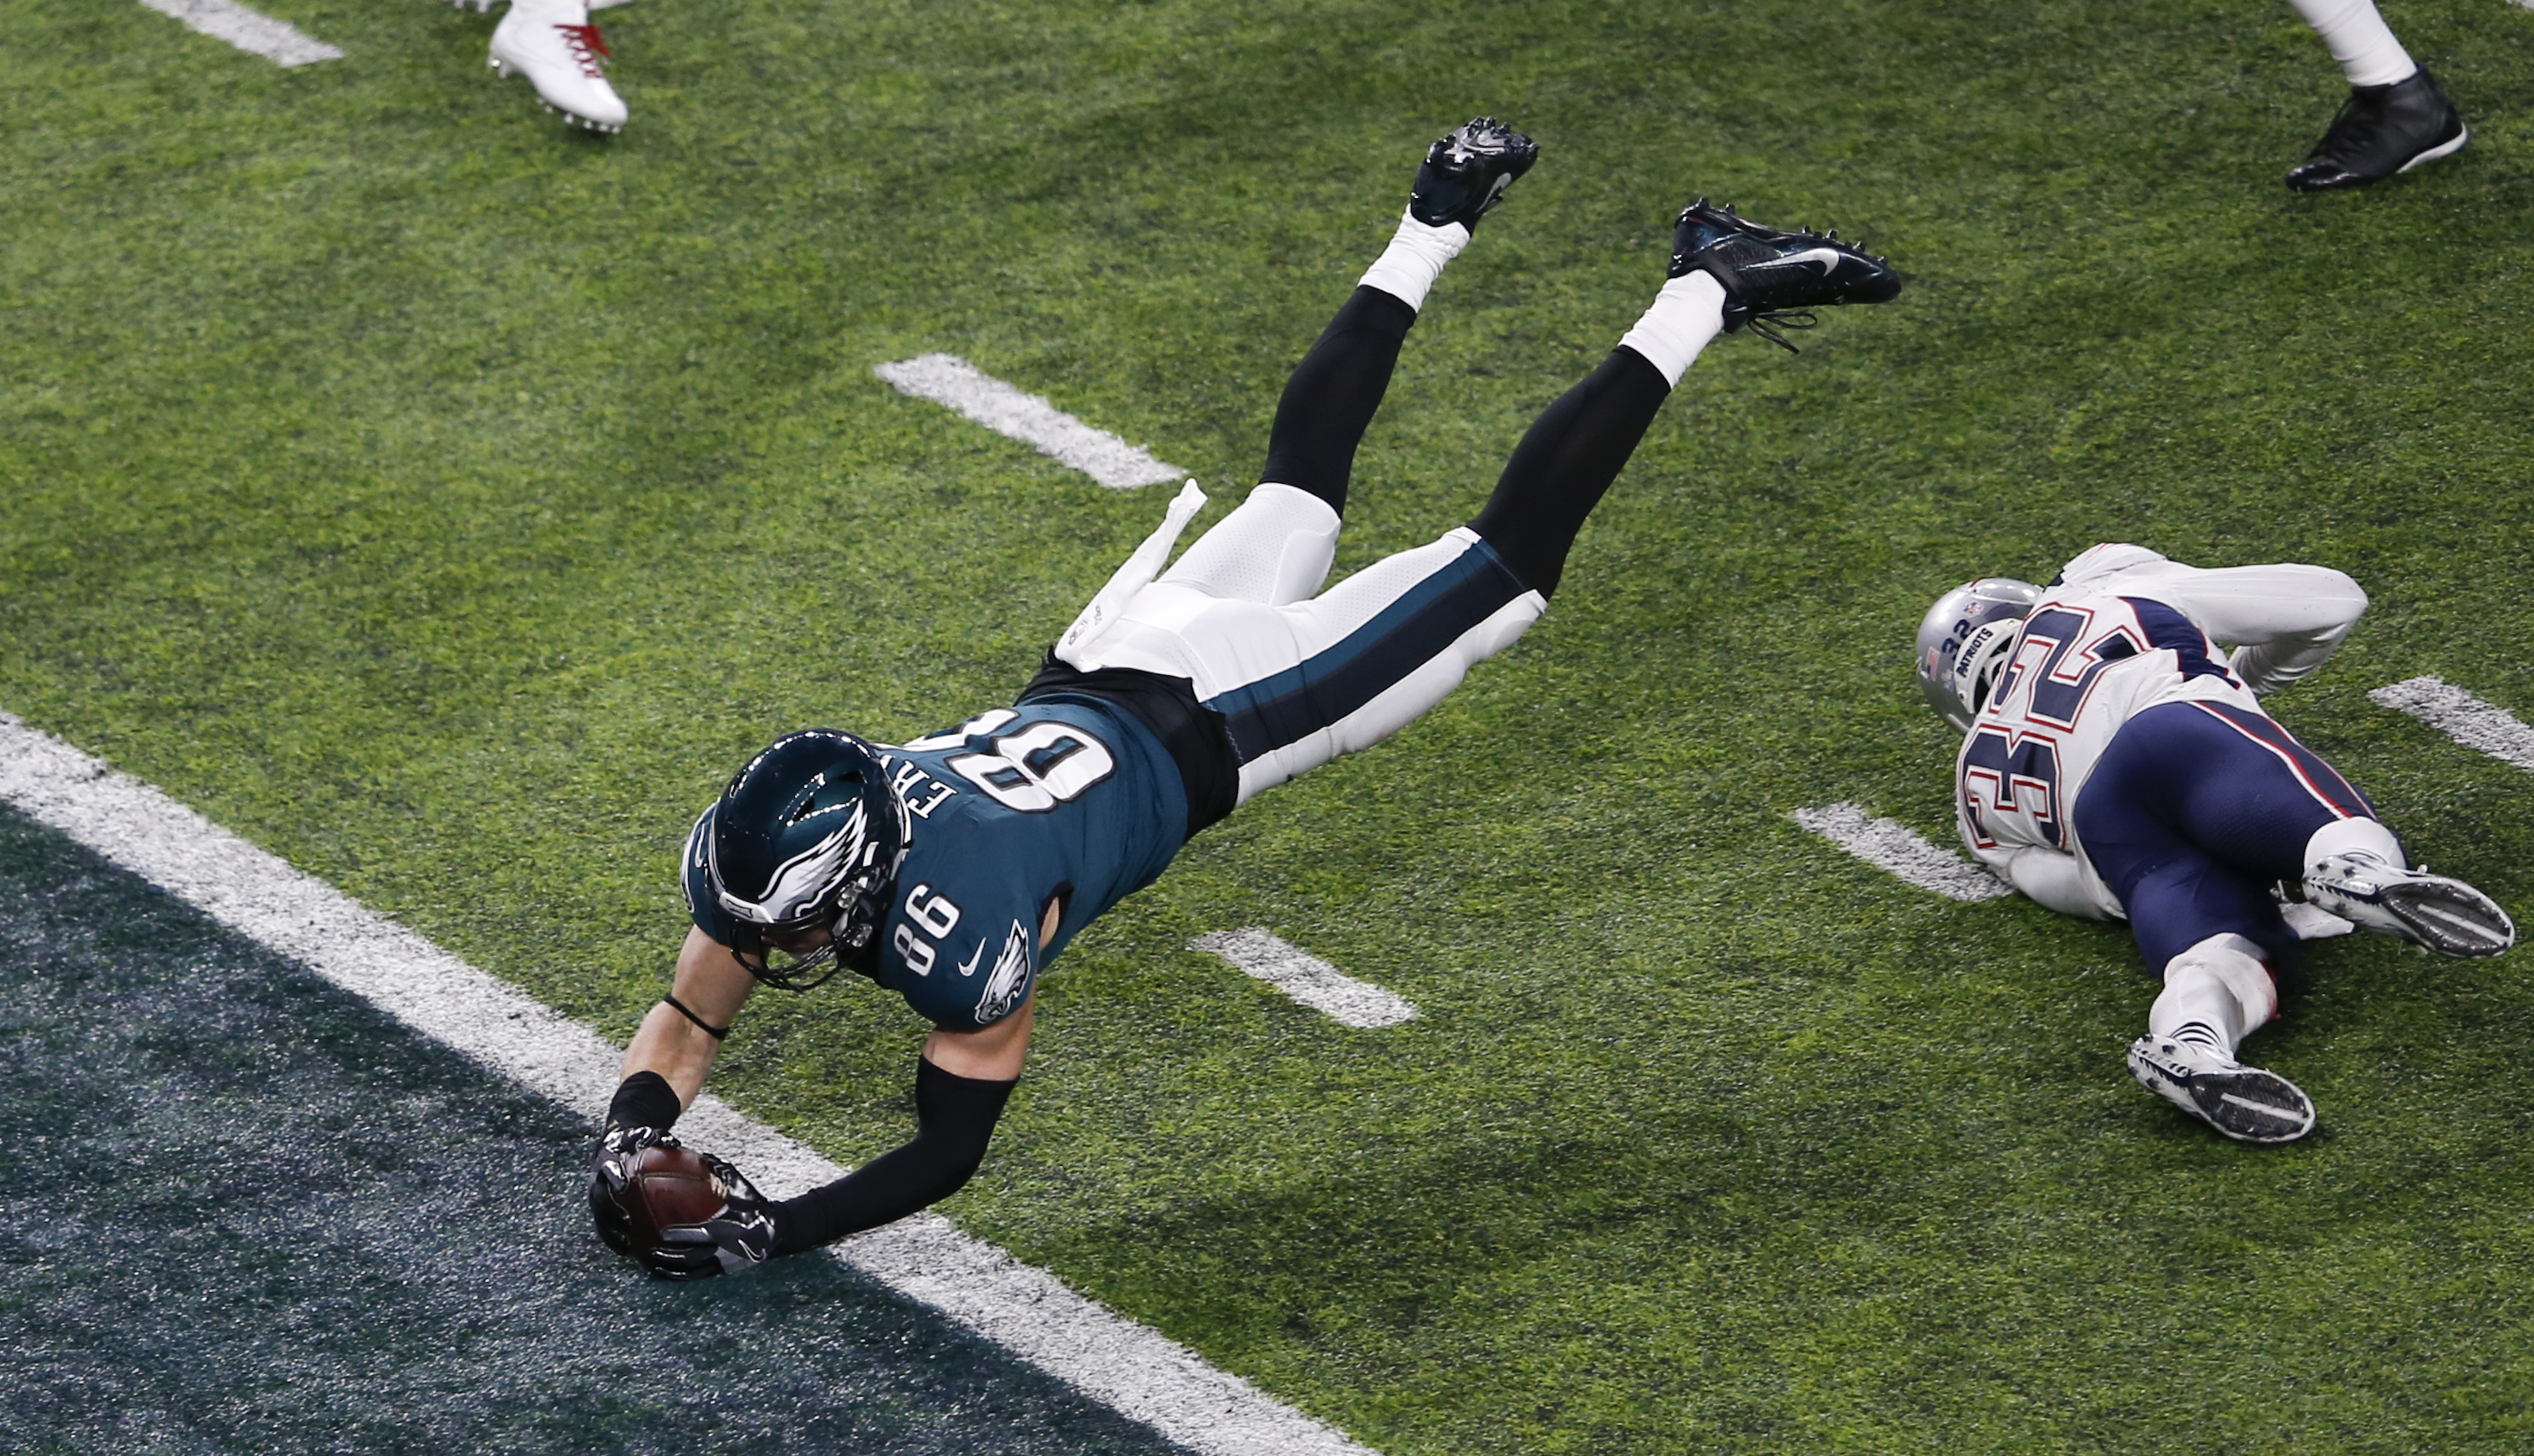 A Philadelphia Eagles football player scores a touchdown by leaping football-first into the end zone.